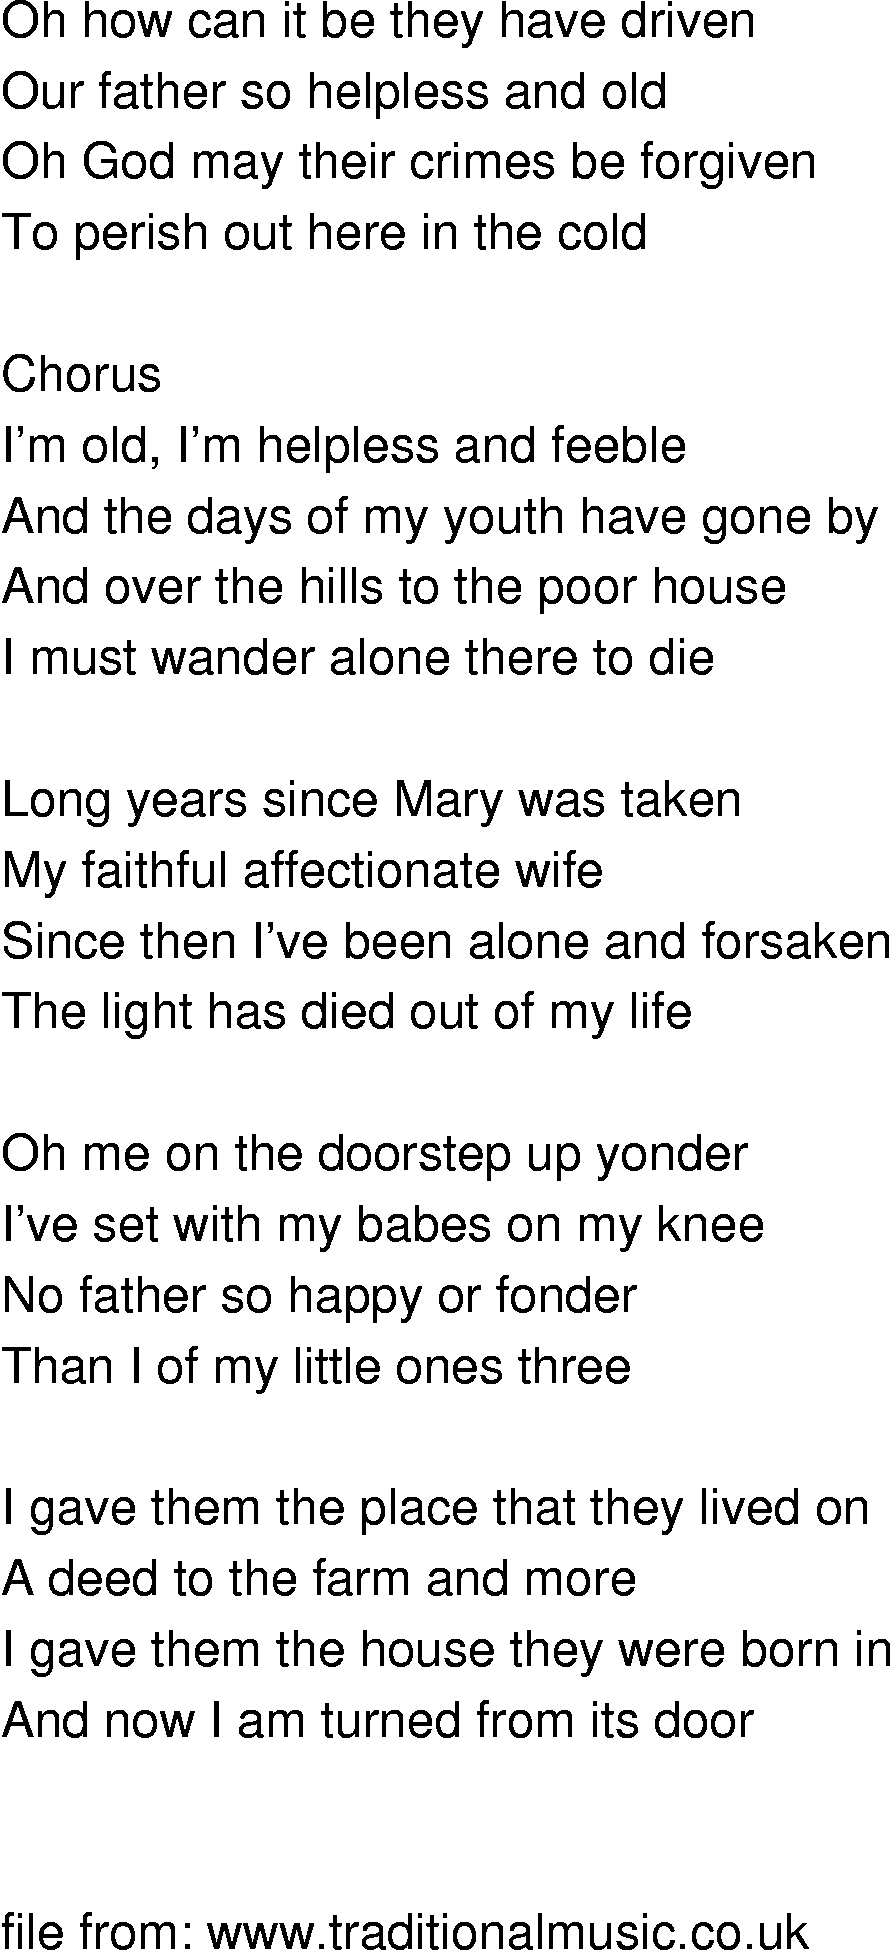 Old-Time (oldtimey) Song Lyrics - over the hills to the poorhouse